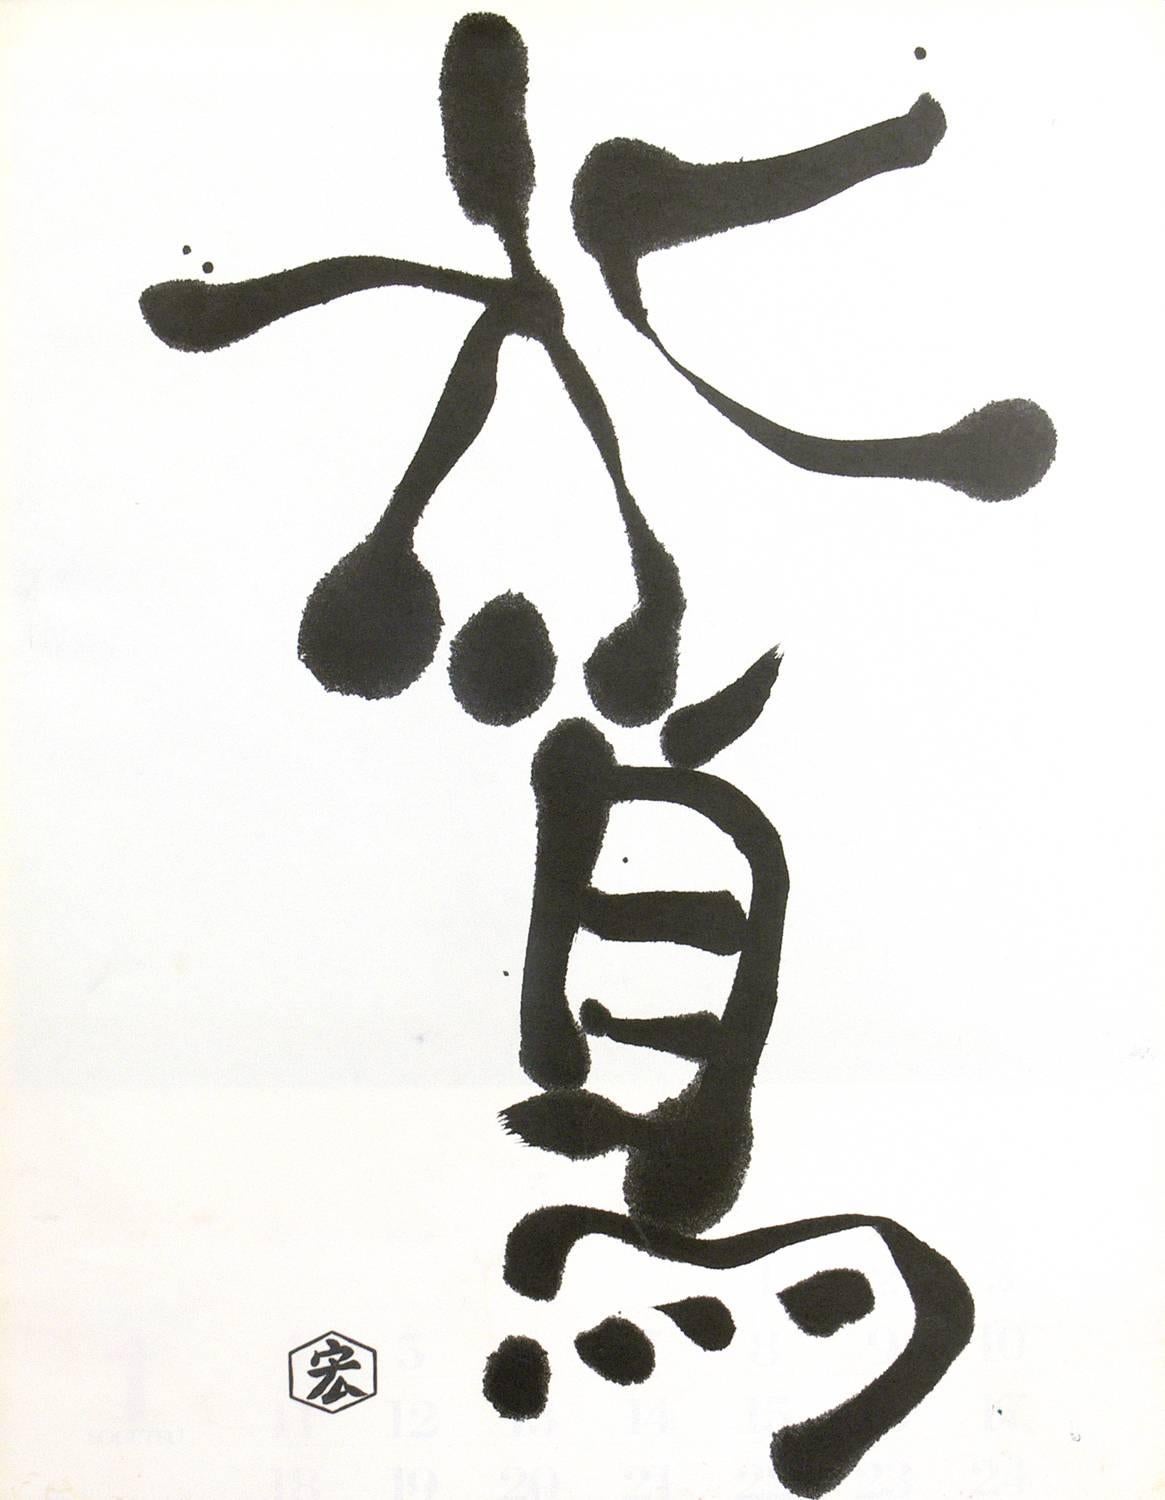 Collection of abstract Japanese calligraphy prints, possibly after Sofu Teshigahara, Japan, circa 1970s. These were from a collection that we purchased that had some other documented Teshigahara works. Many of the abstract expressionist artists such